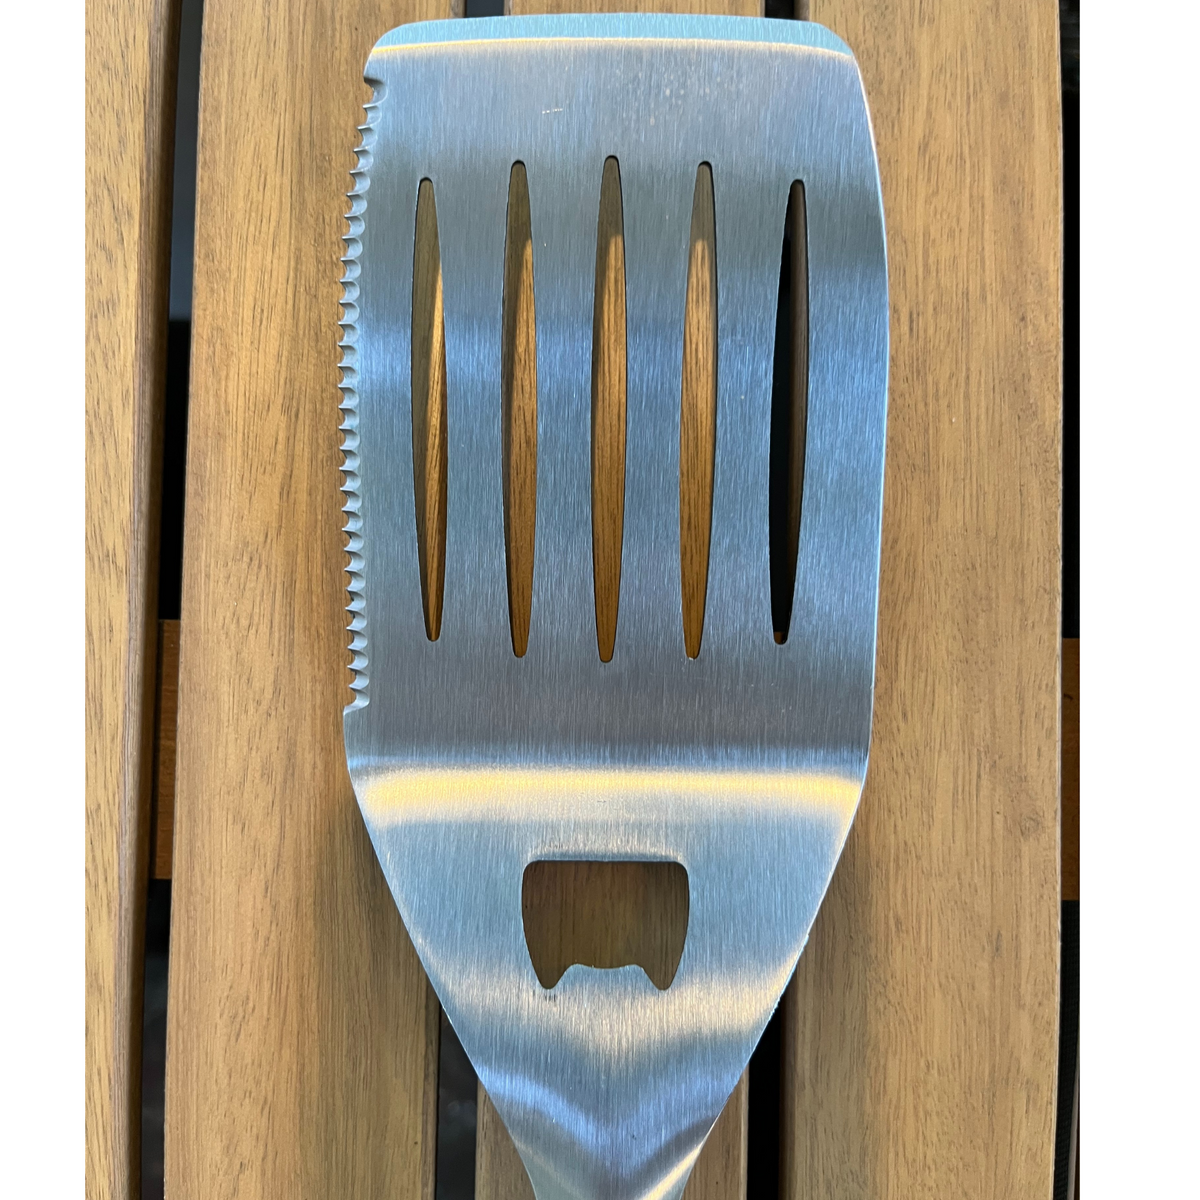 Pork Barrel BBQ Grill Brush w Scraper - Safe Bristle-Free, Heavy Duty Grill  Accessories for Outdoor Grill Cleaning